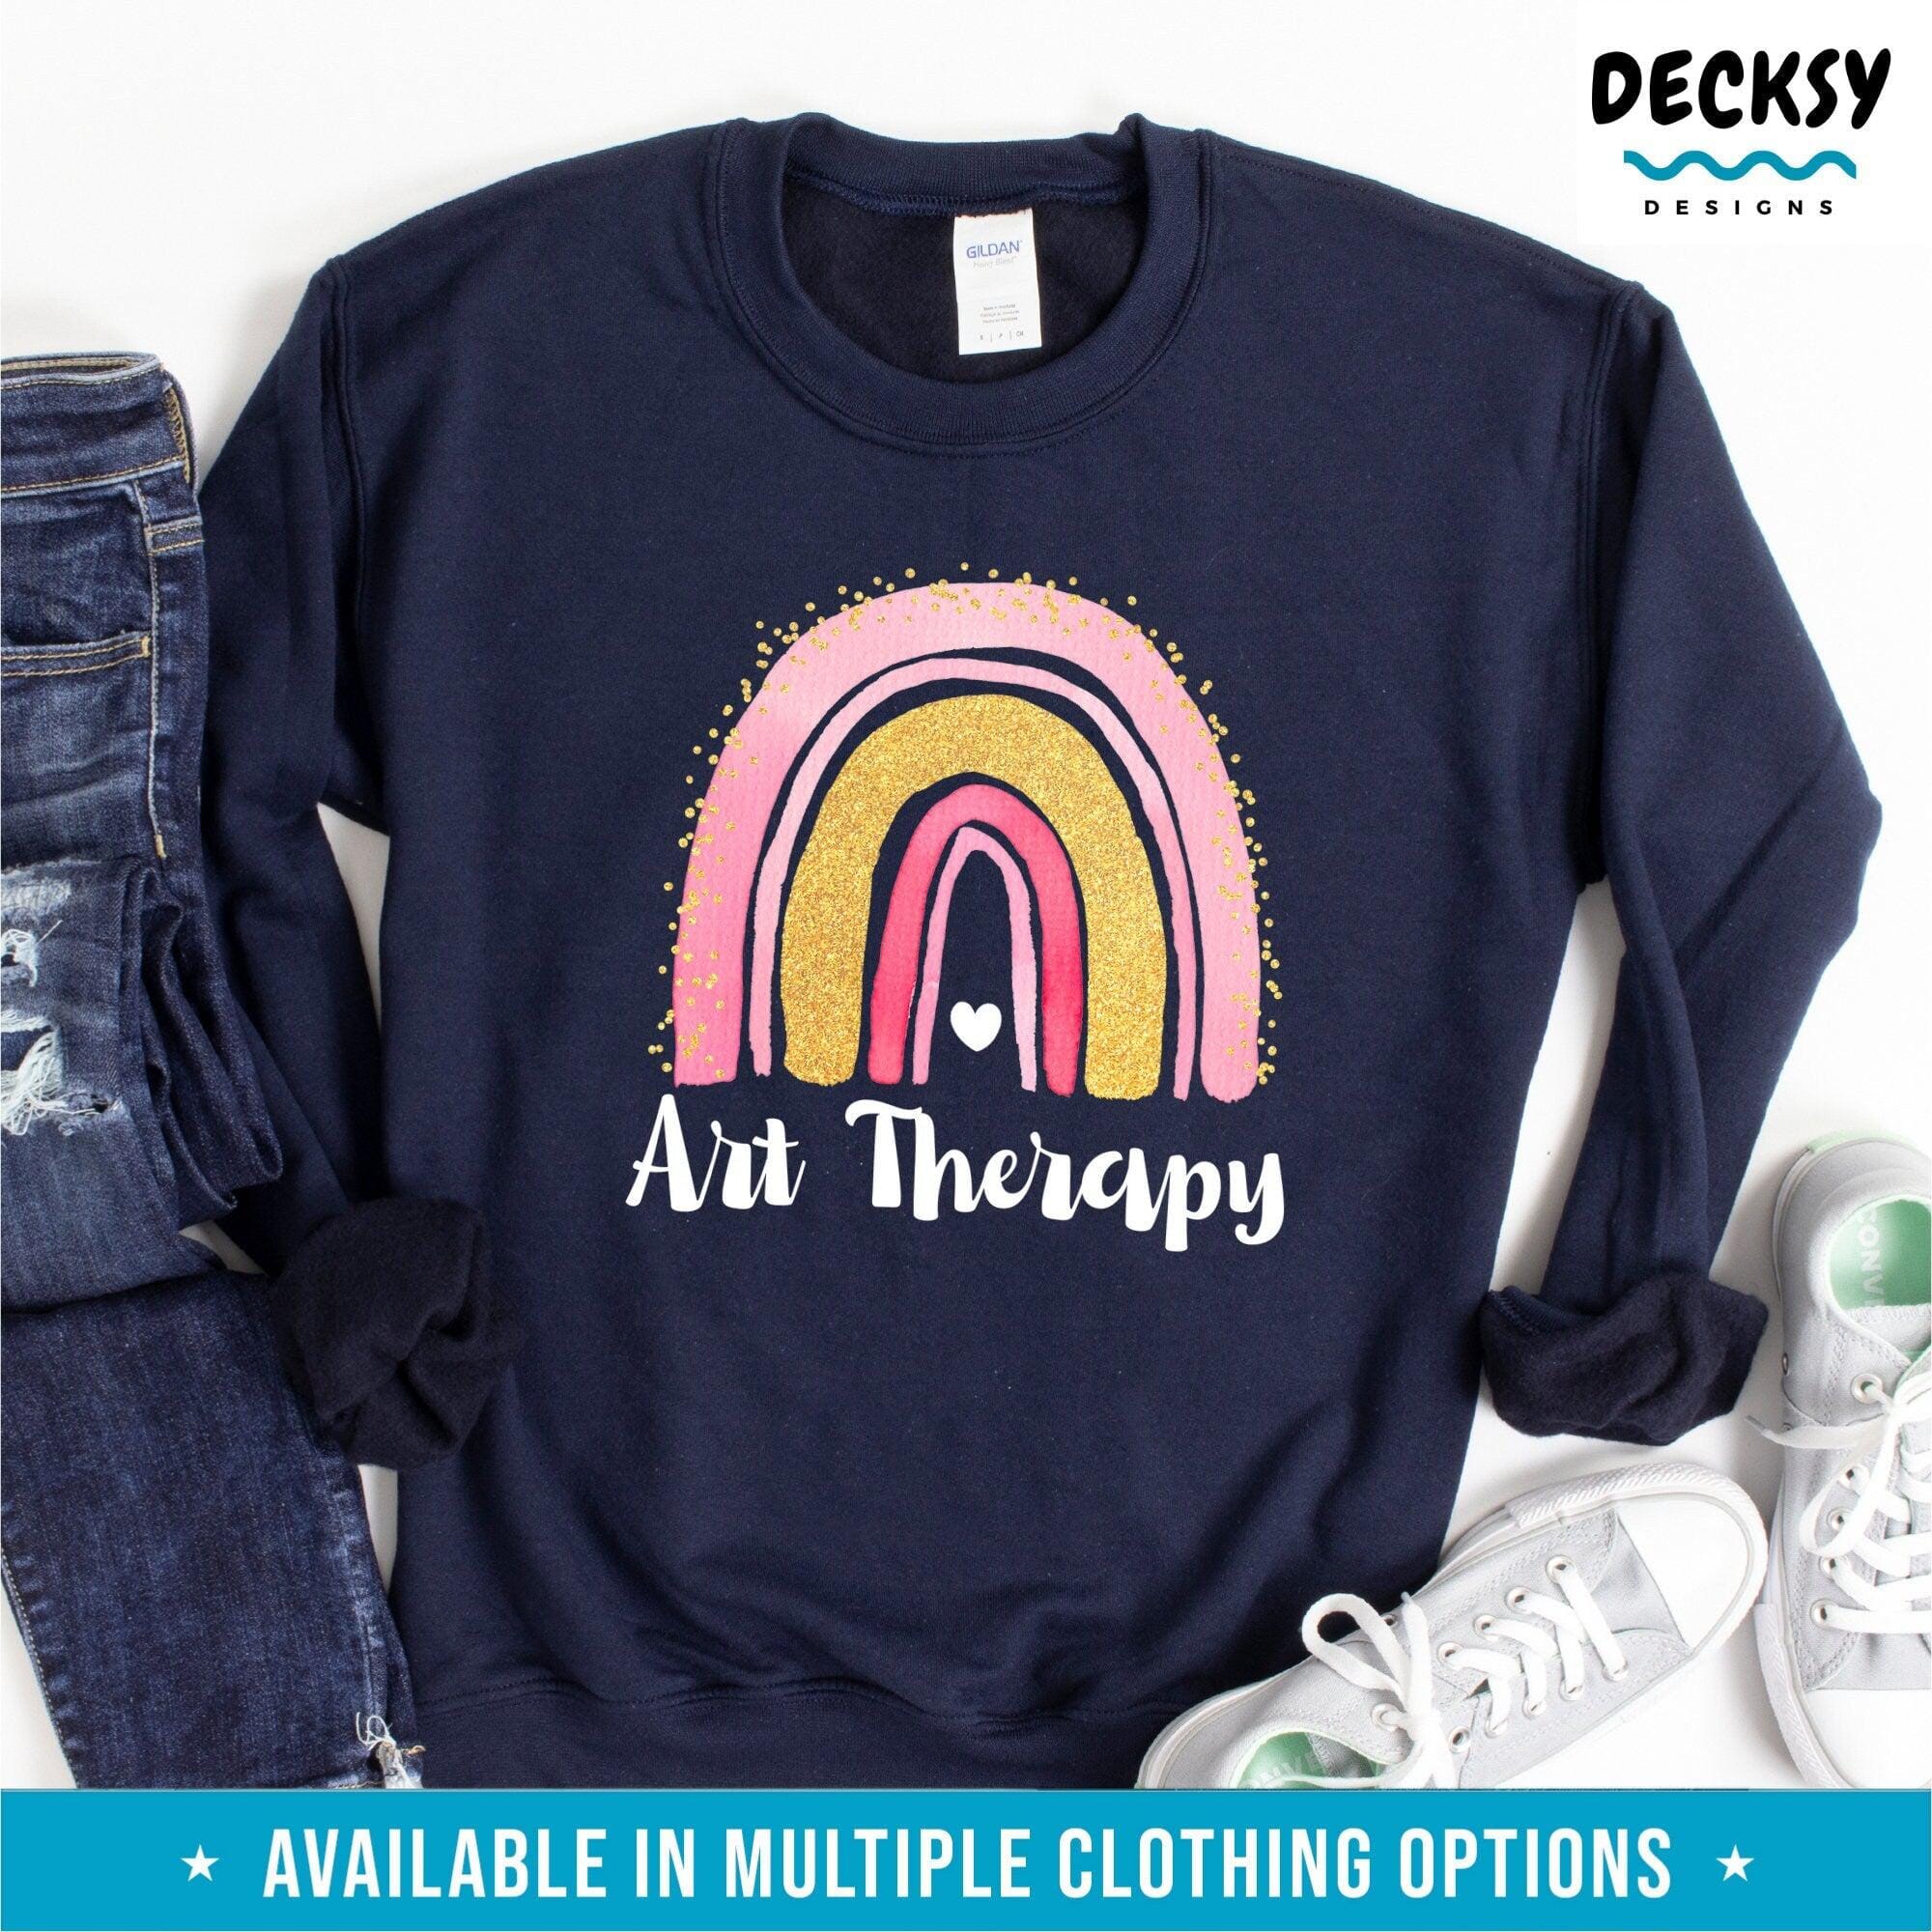 Art Therapy Shirt, Gift for Artist-Clothing:Gender-Neutral Adult Clothing:Tops & Tees:T-shirts:Graphic Tees-DecksyDesigns